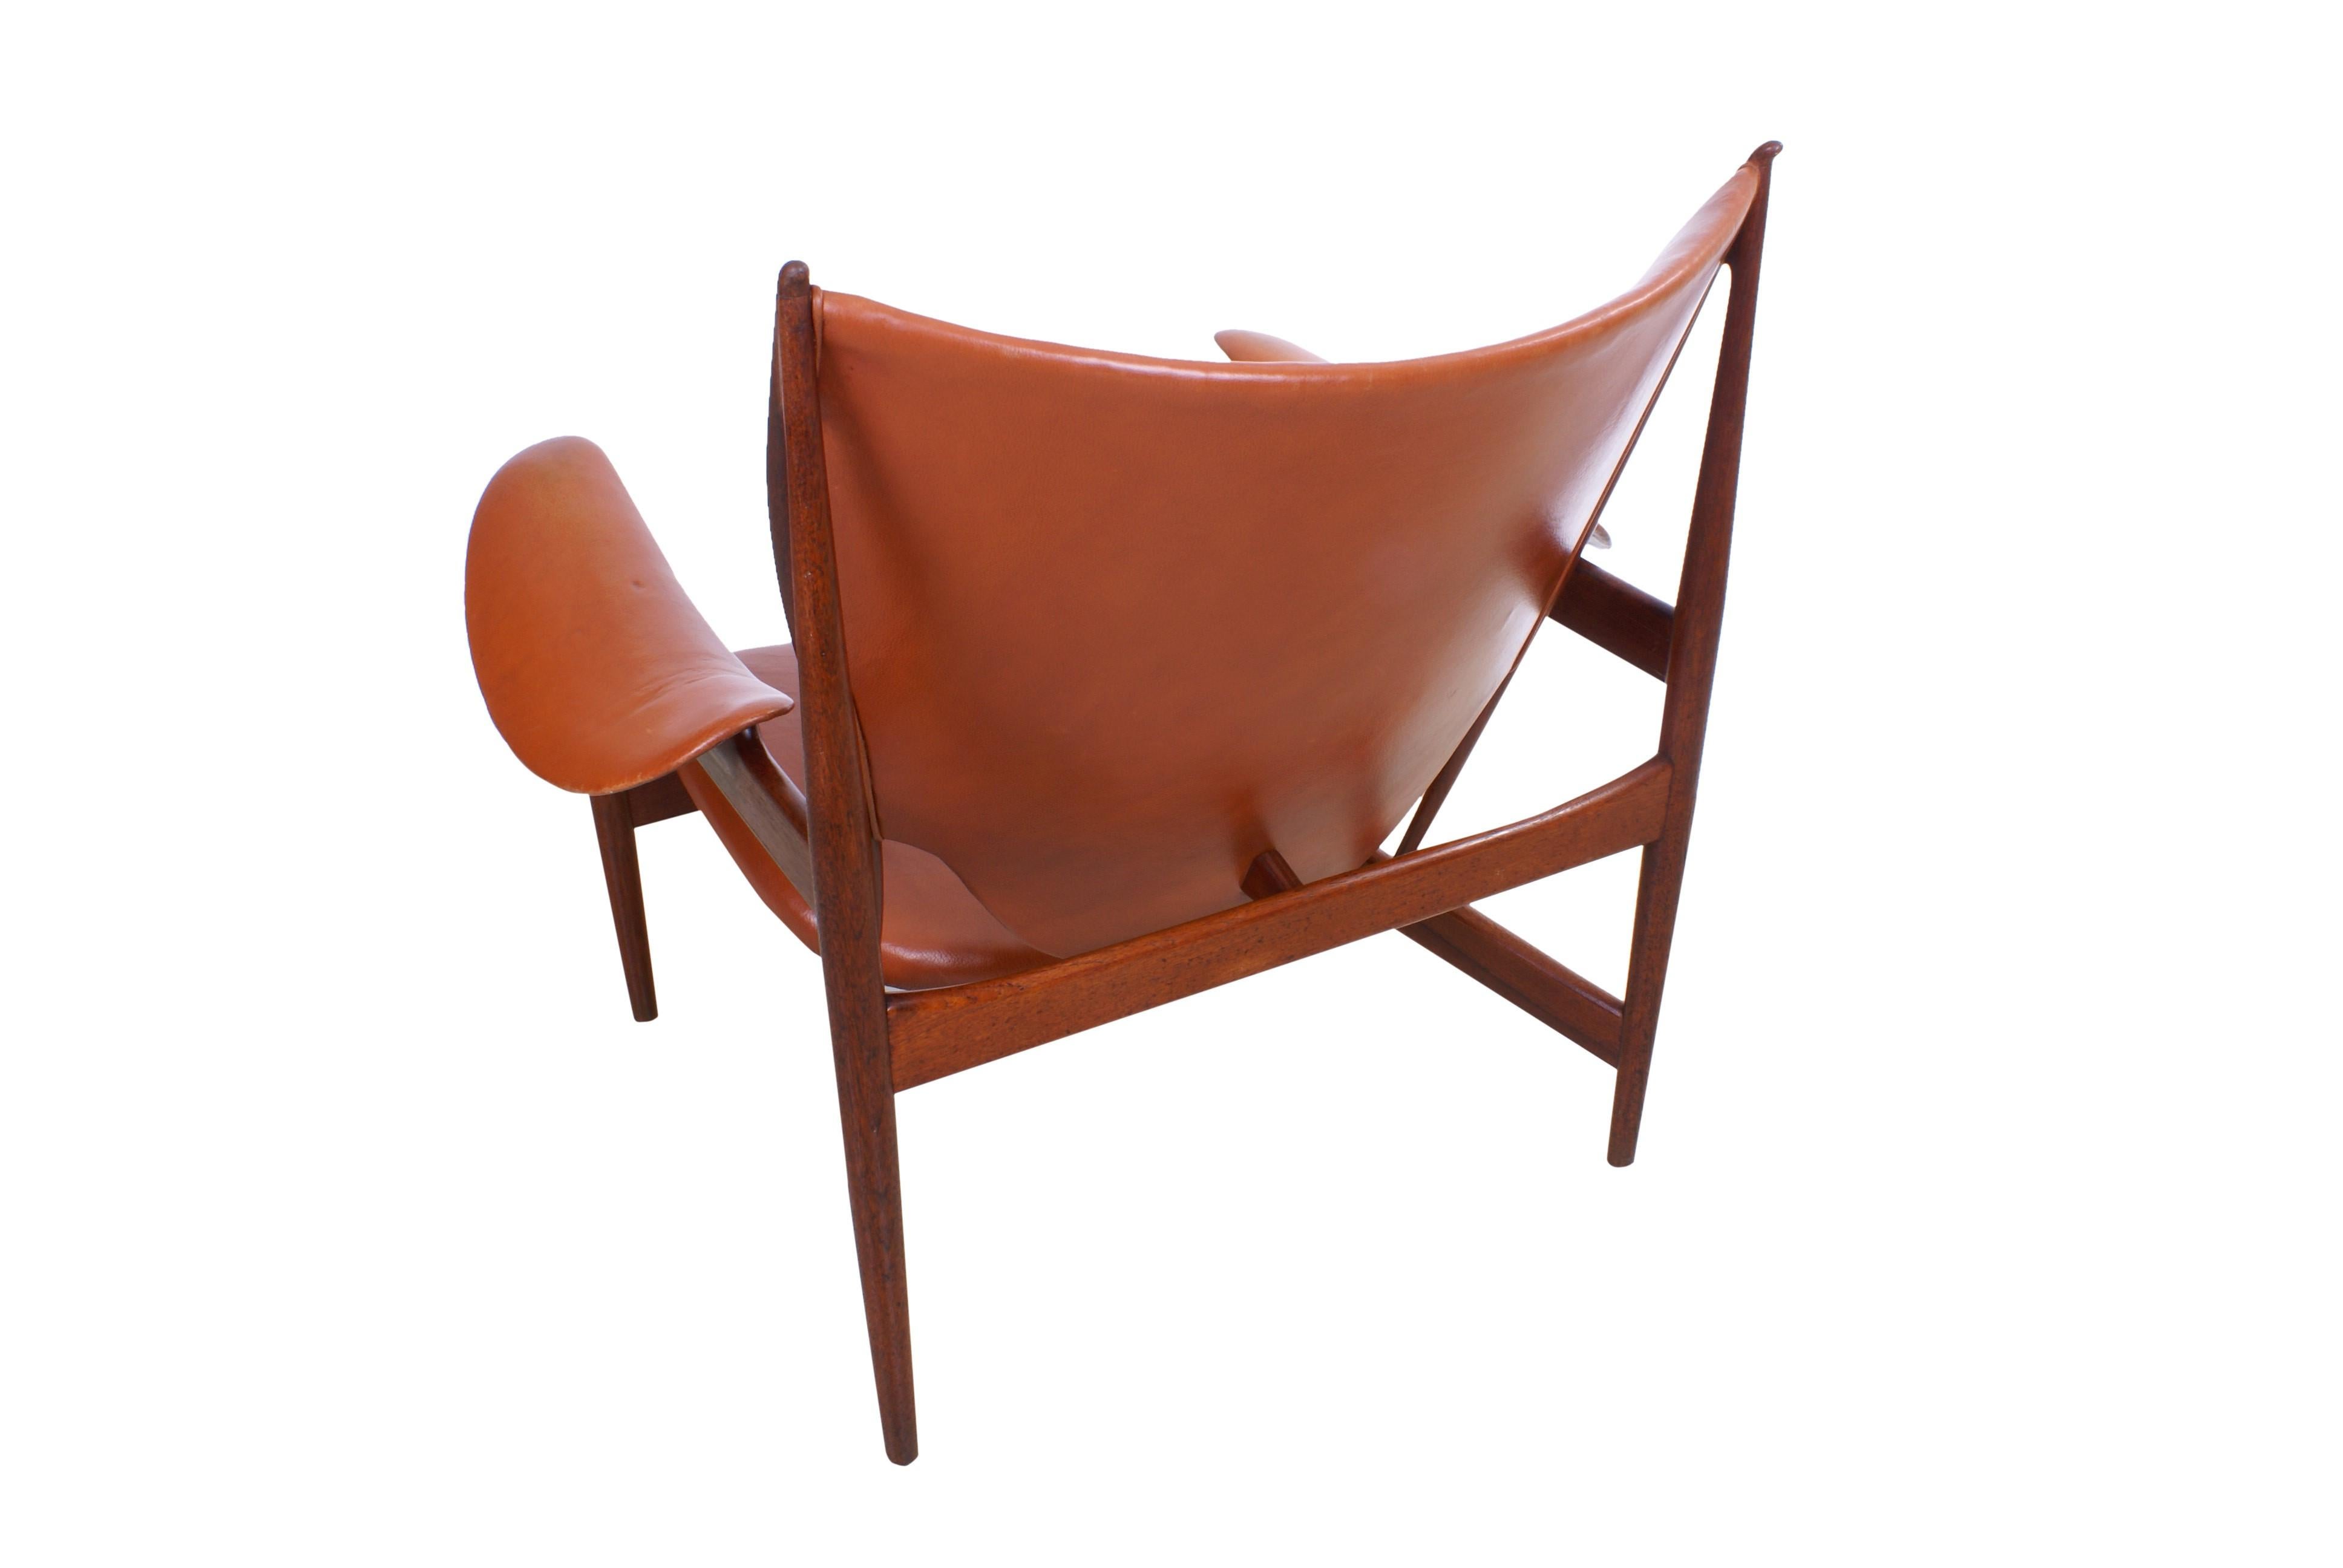 Finn Juhl Rare 'Chieftain' Chair in Teak and Leather for Niels Vodder, 1949 For Sale 4